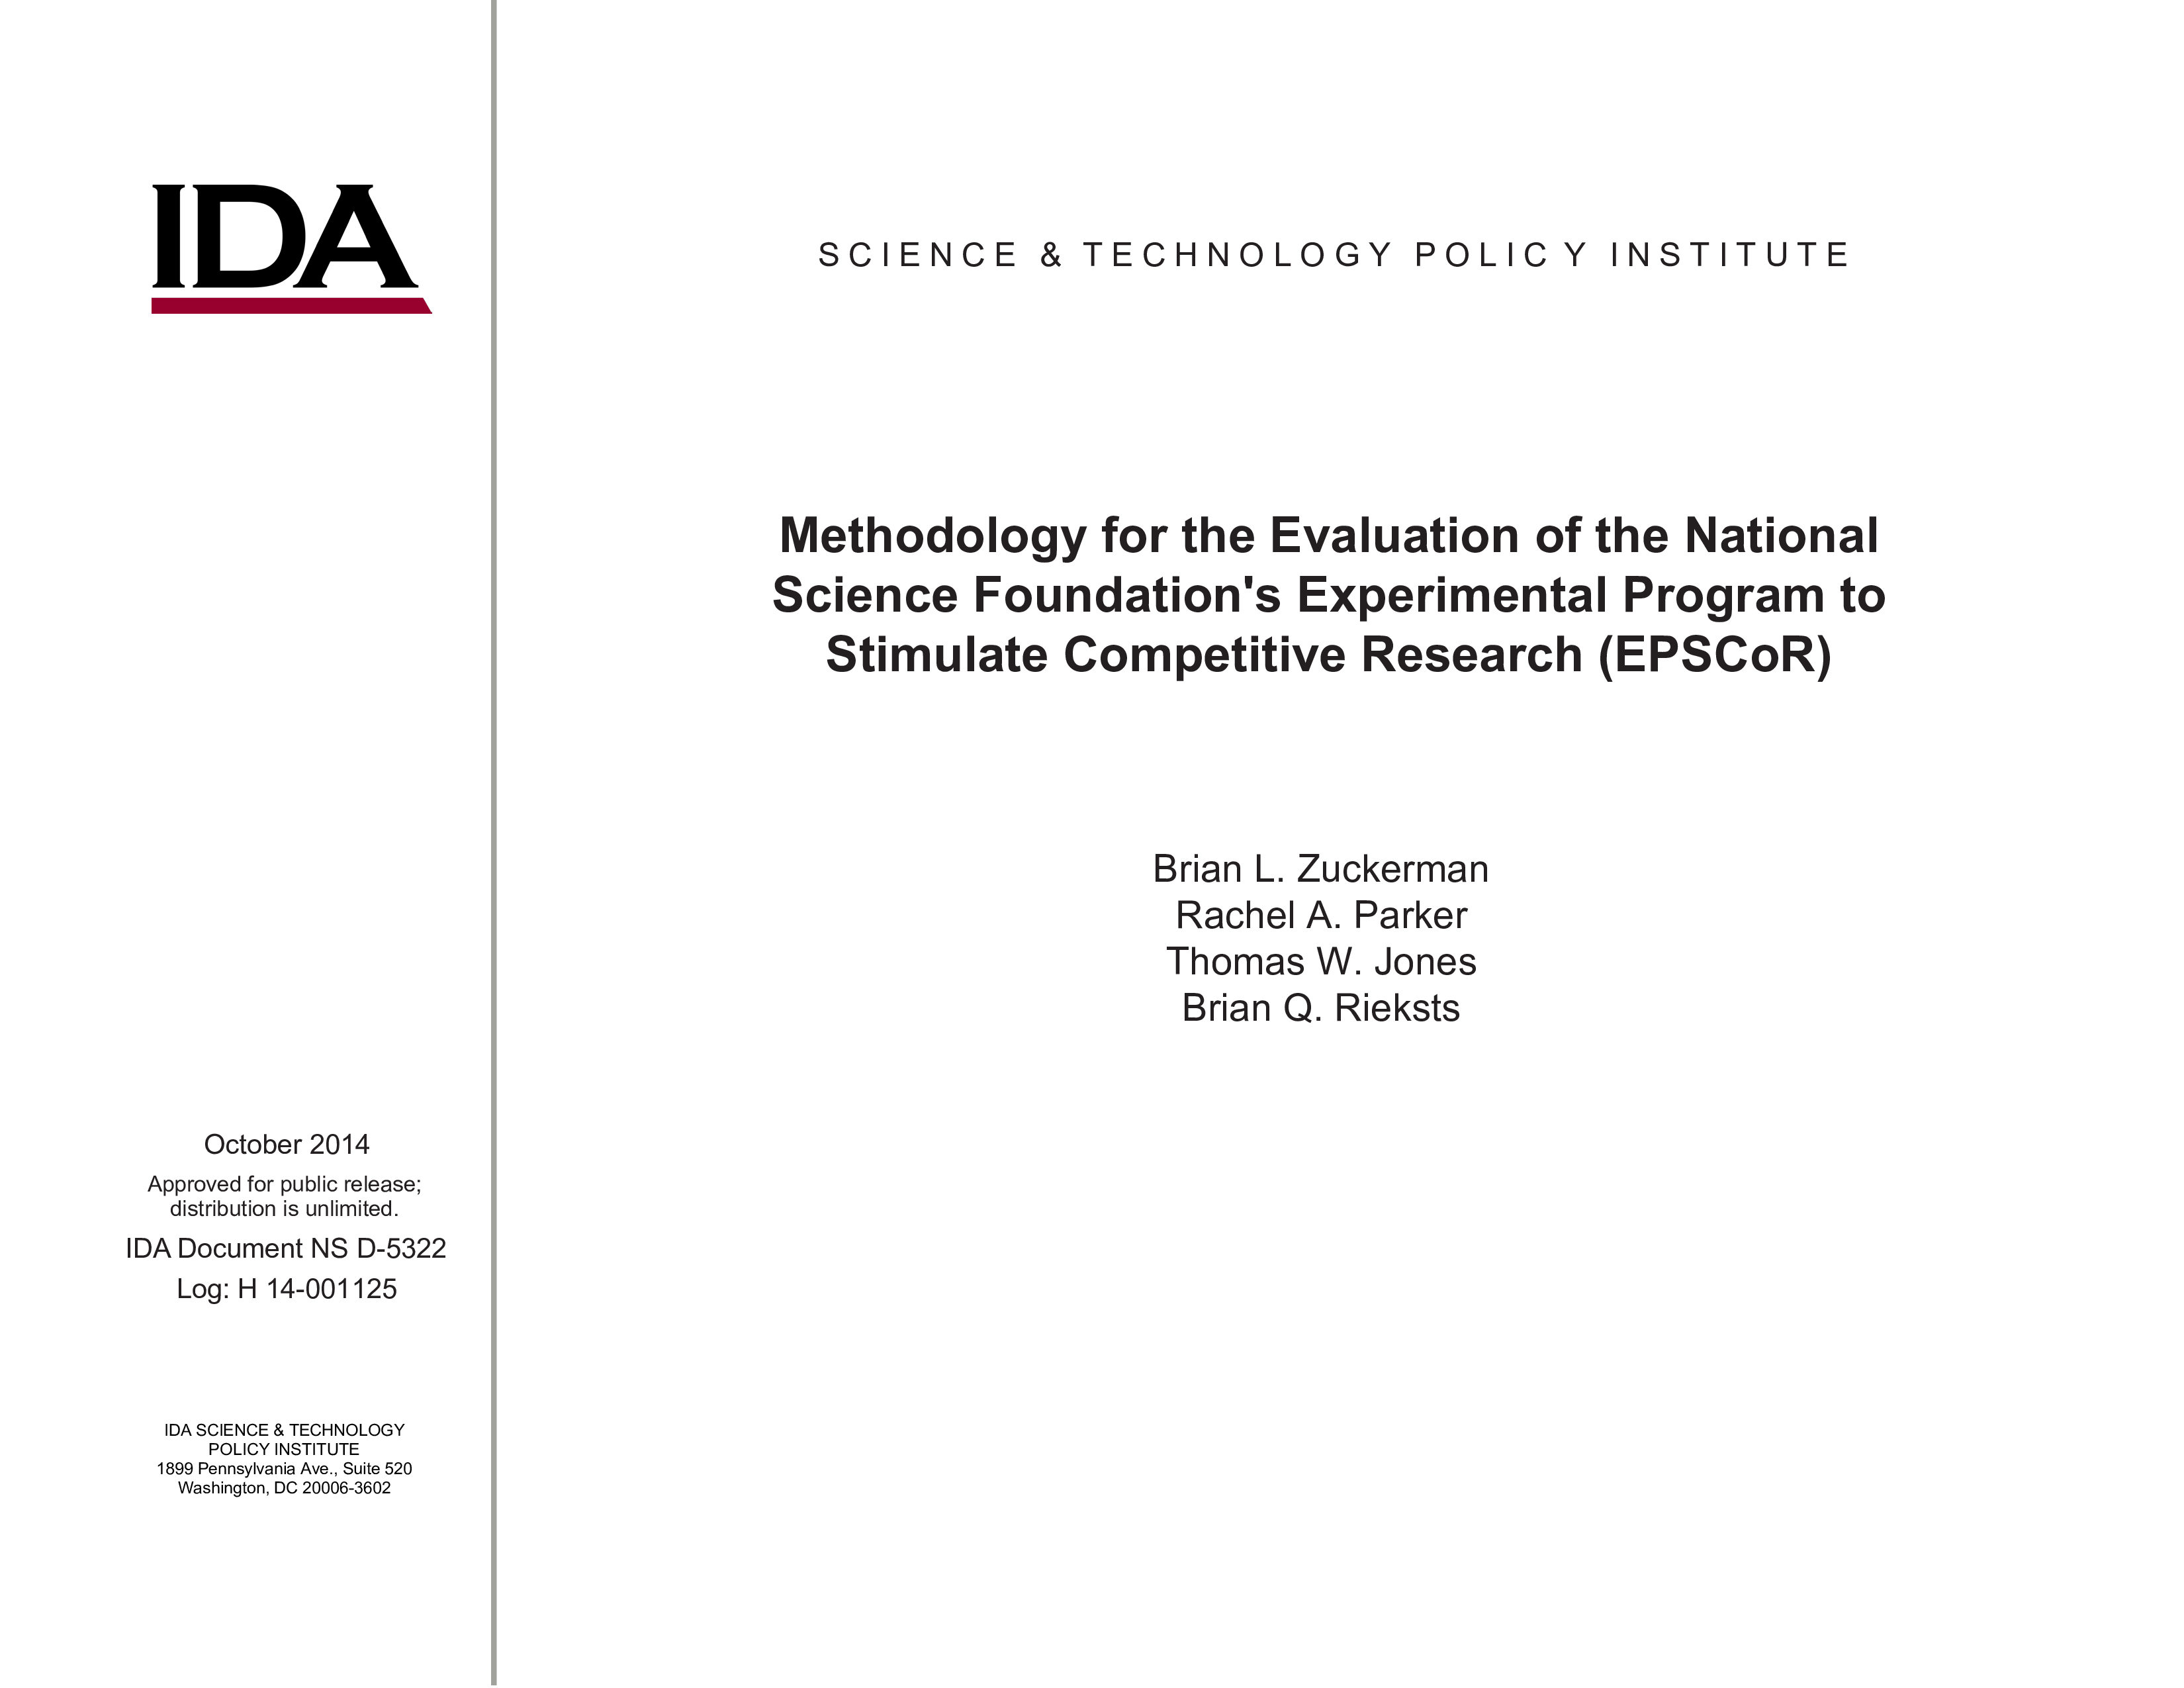 Methodology for the Evaluation of the National Science Foundation’s Experimental Program to Stimulate Competitive Research (EPSCoR)